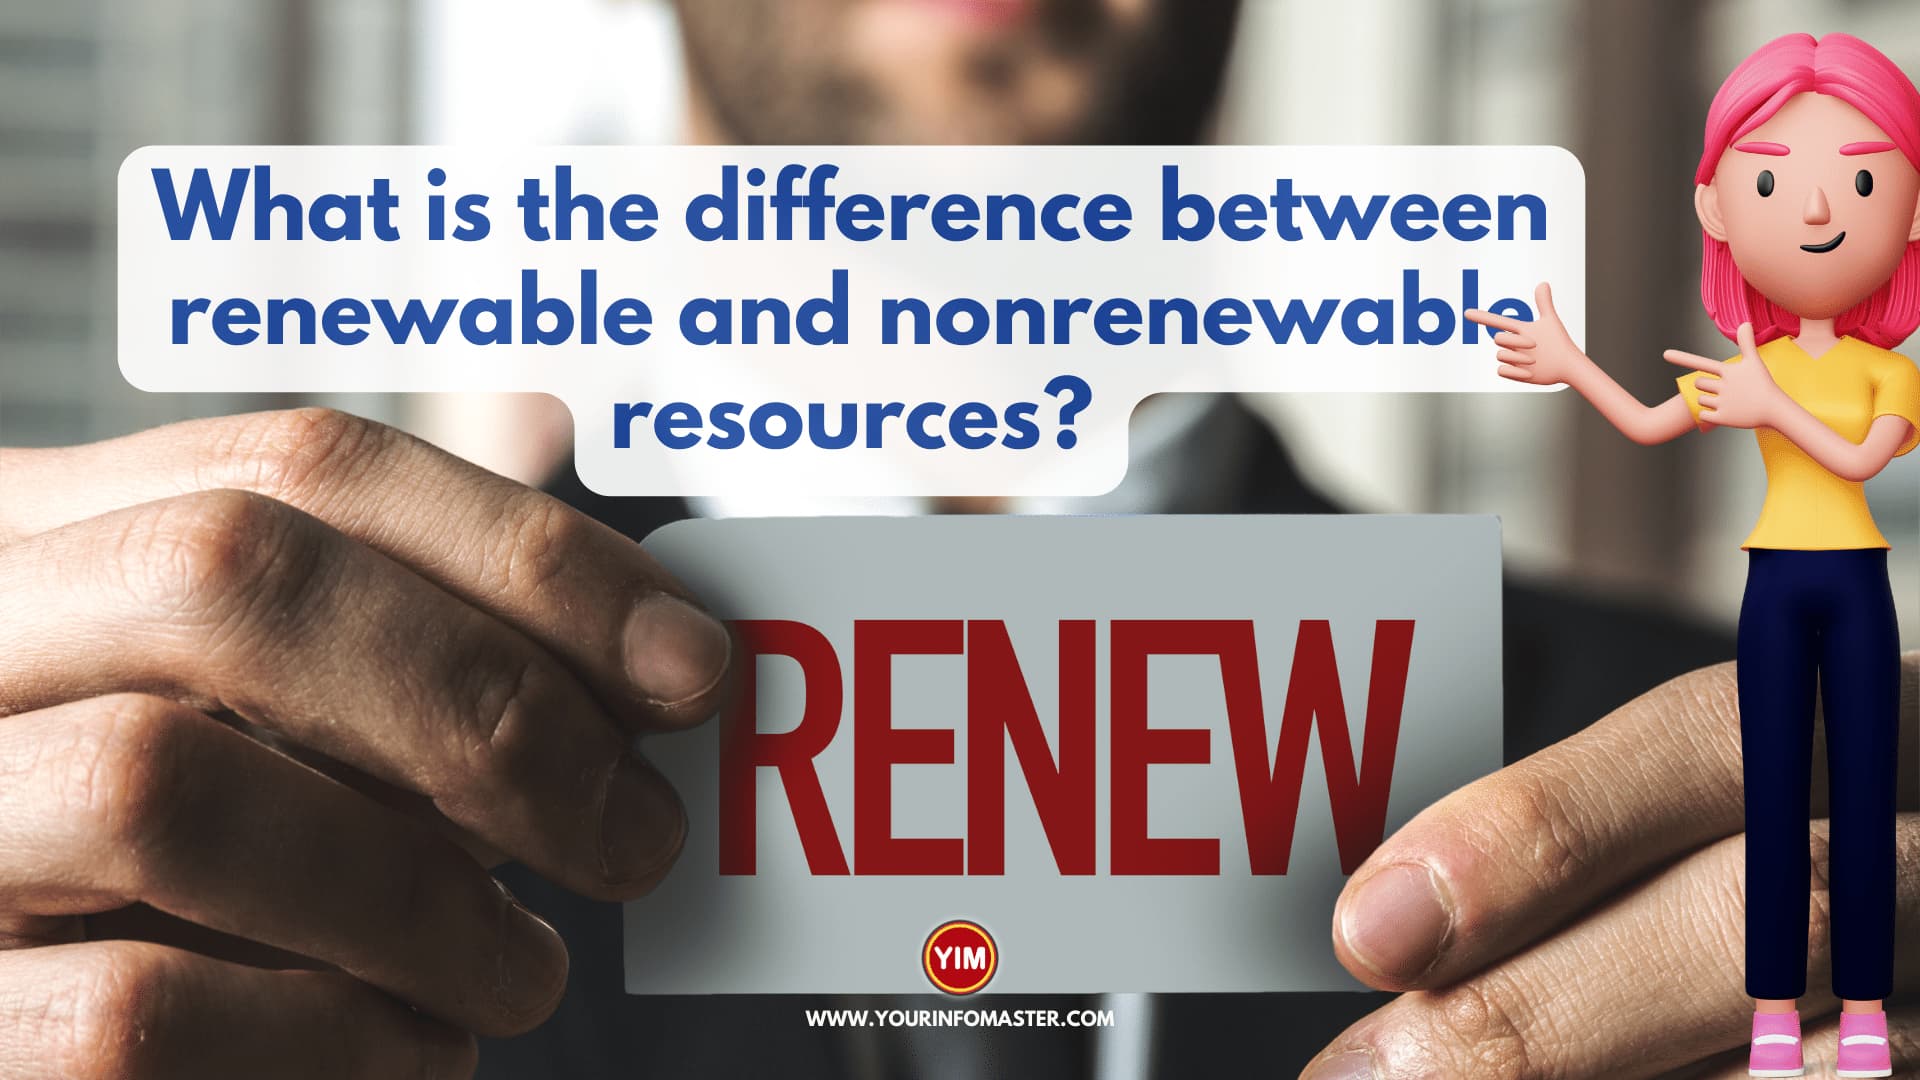 What is the difference between renewable and nonrenewable resources